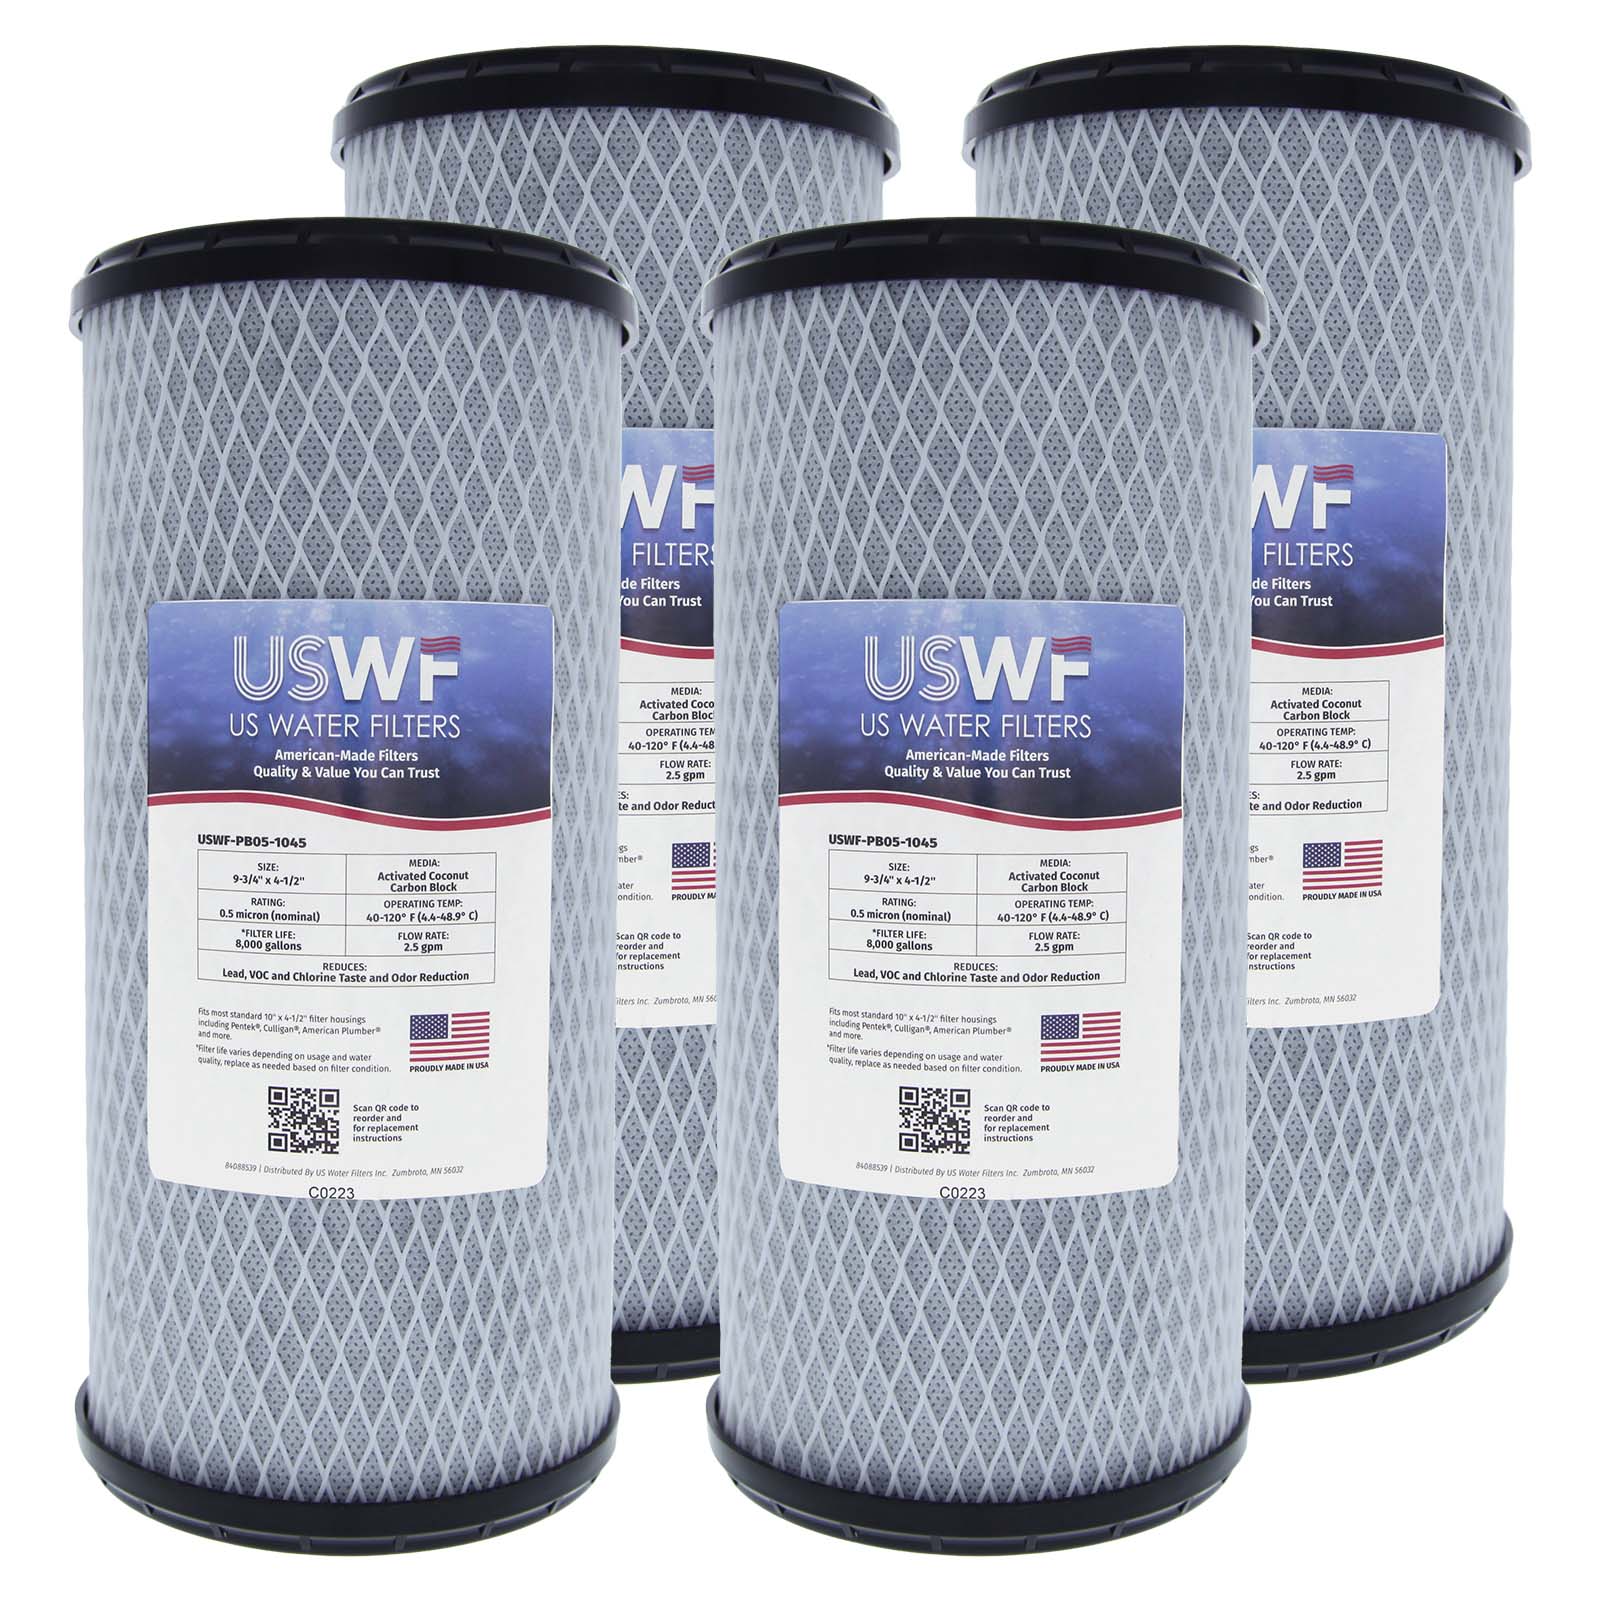 Lead Reducing Carbon Block Filter by USWF 0.5 Micron 10"x4.5"